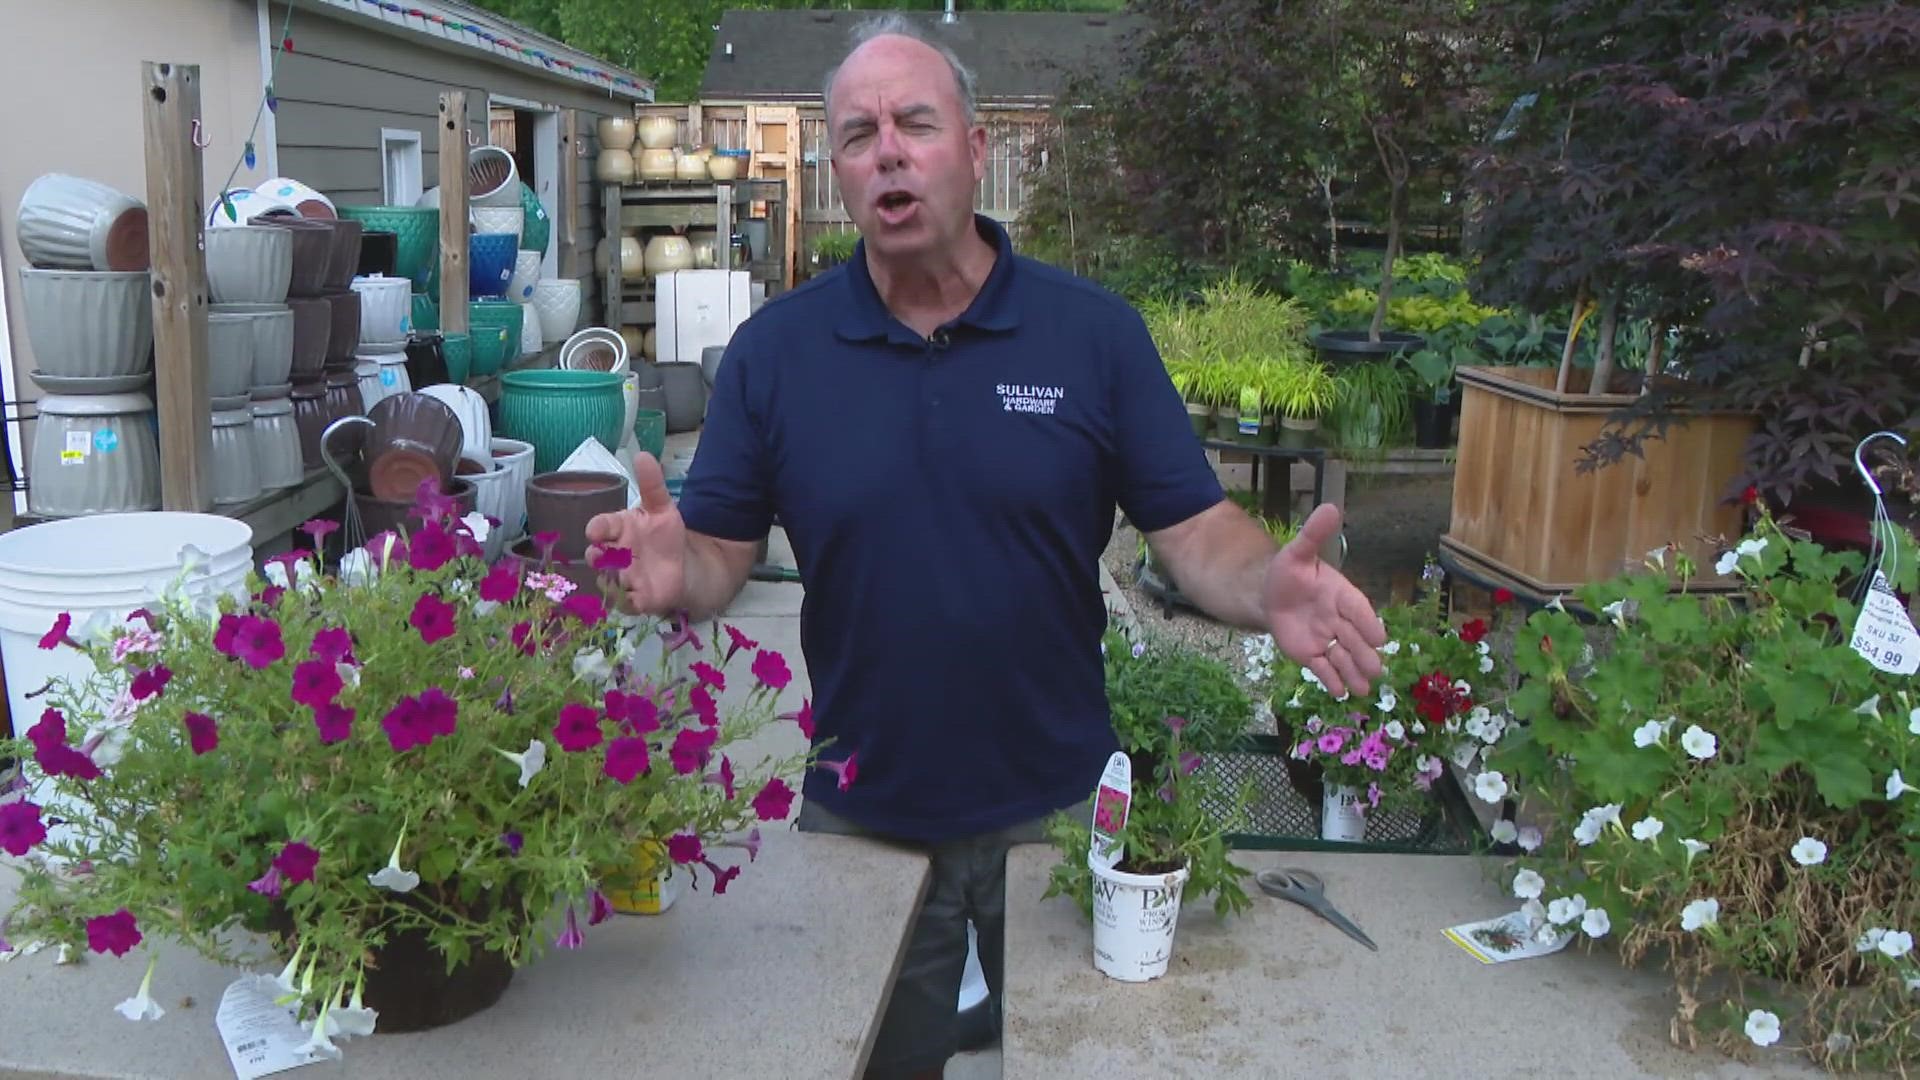 Pat Sullivan shows you how to maintain your home during the summer from taking care of your flowers, patio furniture and more!